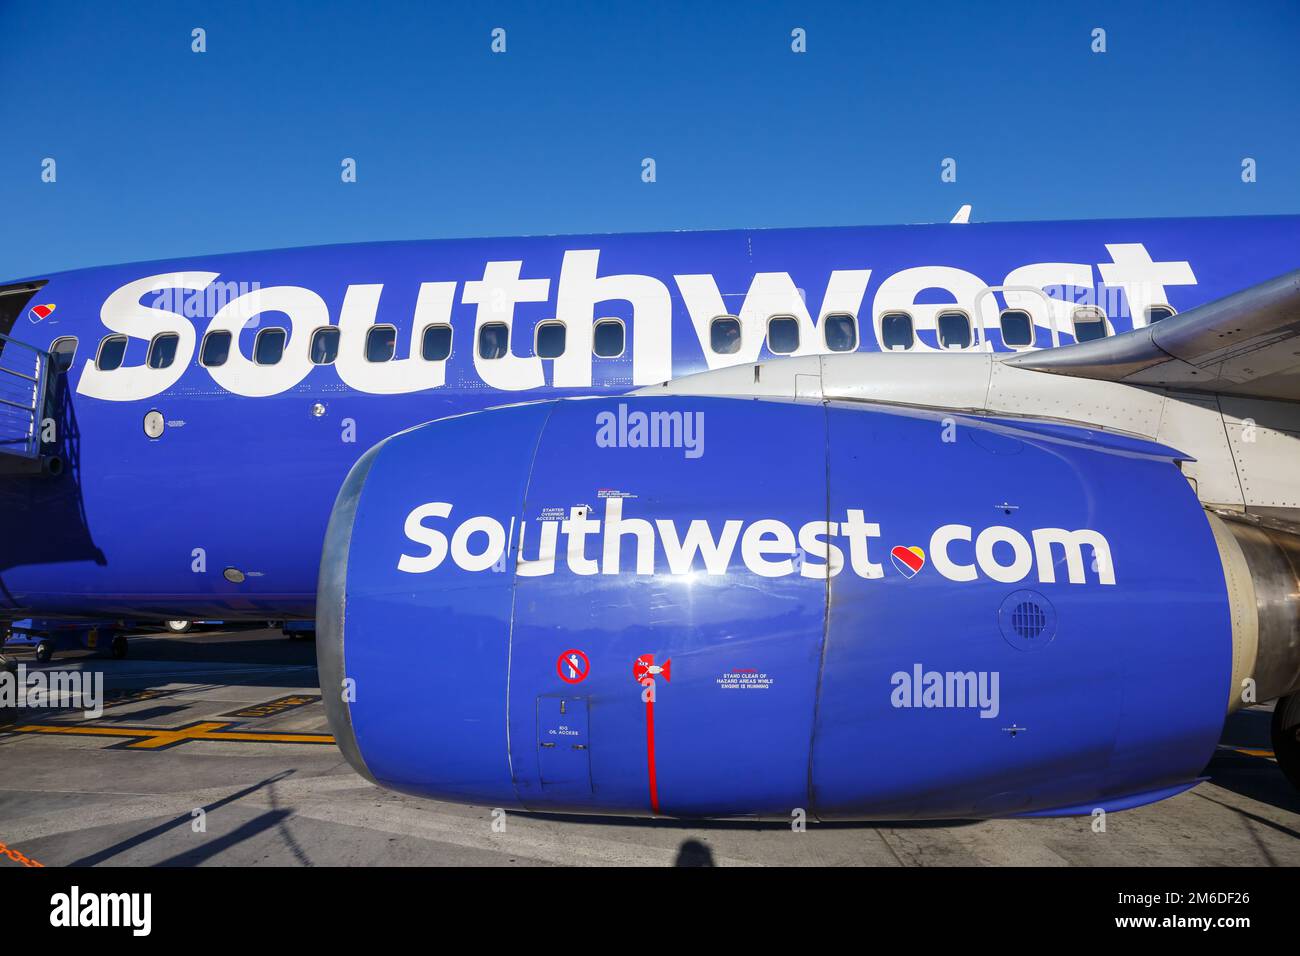 Southwest Airlines Boeing 737-700 airplane engine Stock Photo